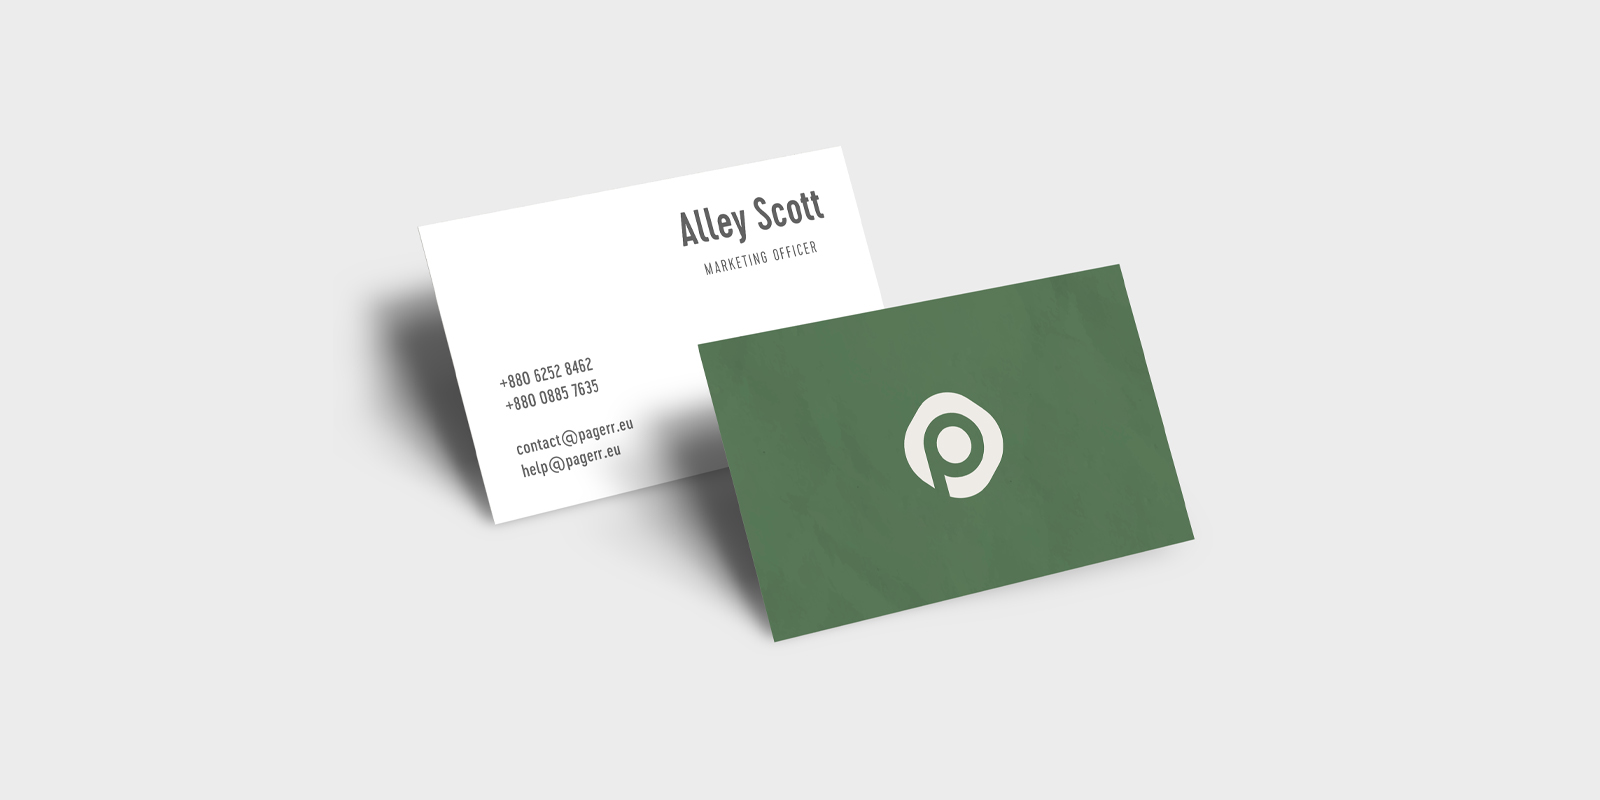 Simple business cards in Perth - Print with Pagerr